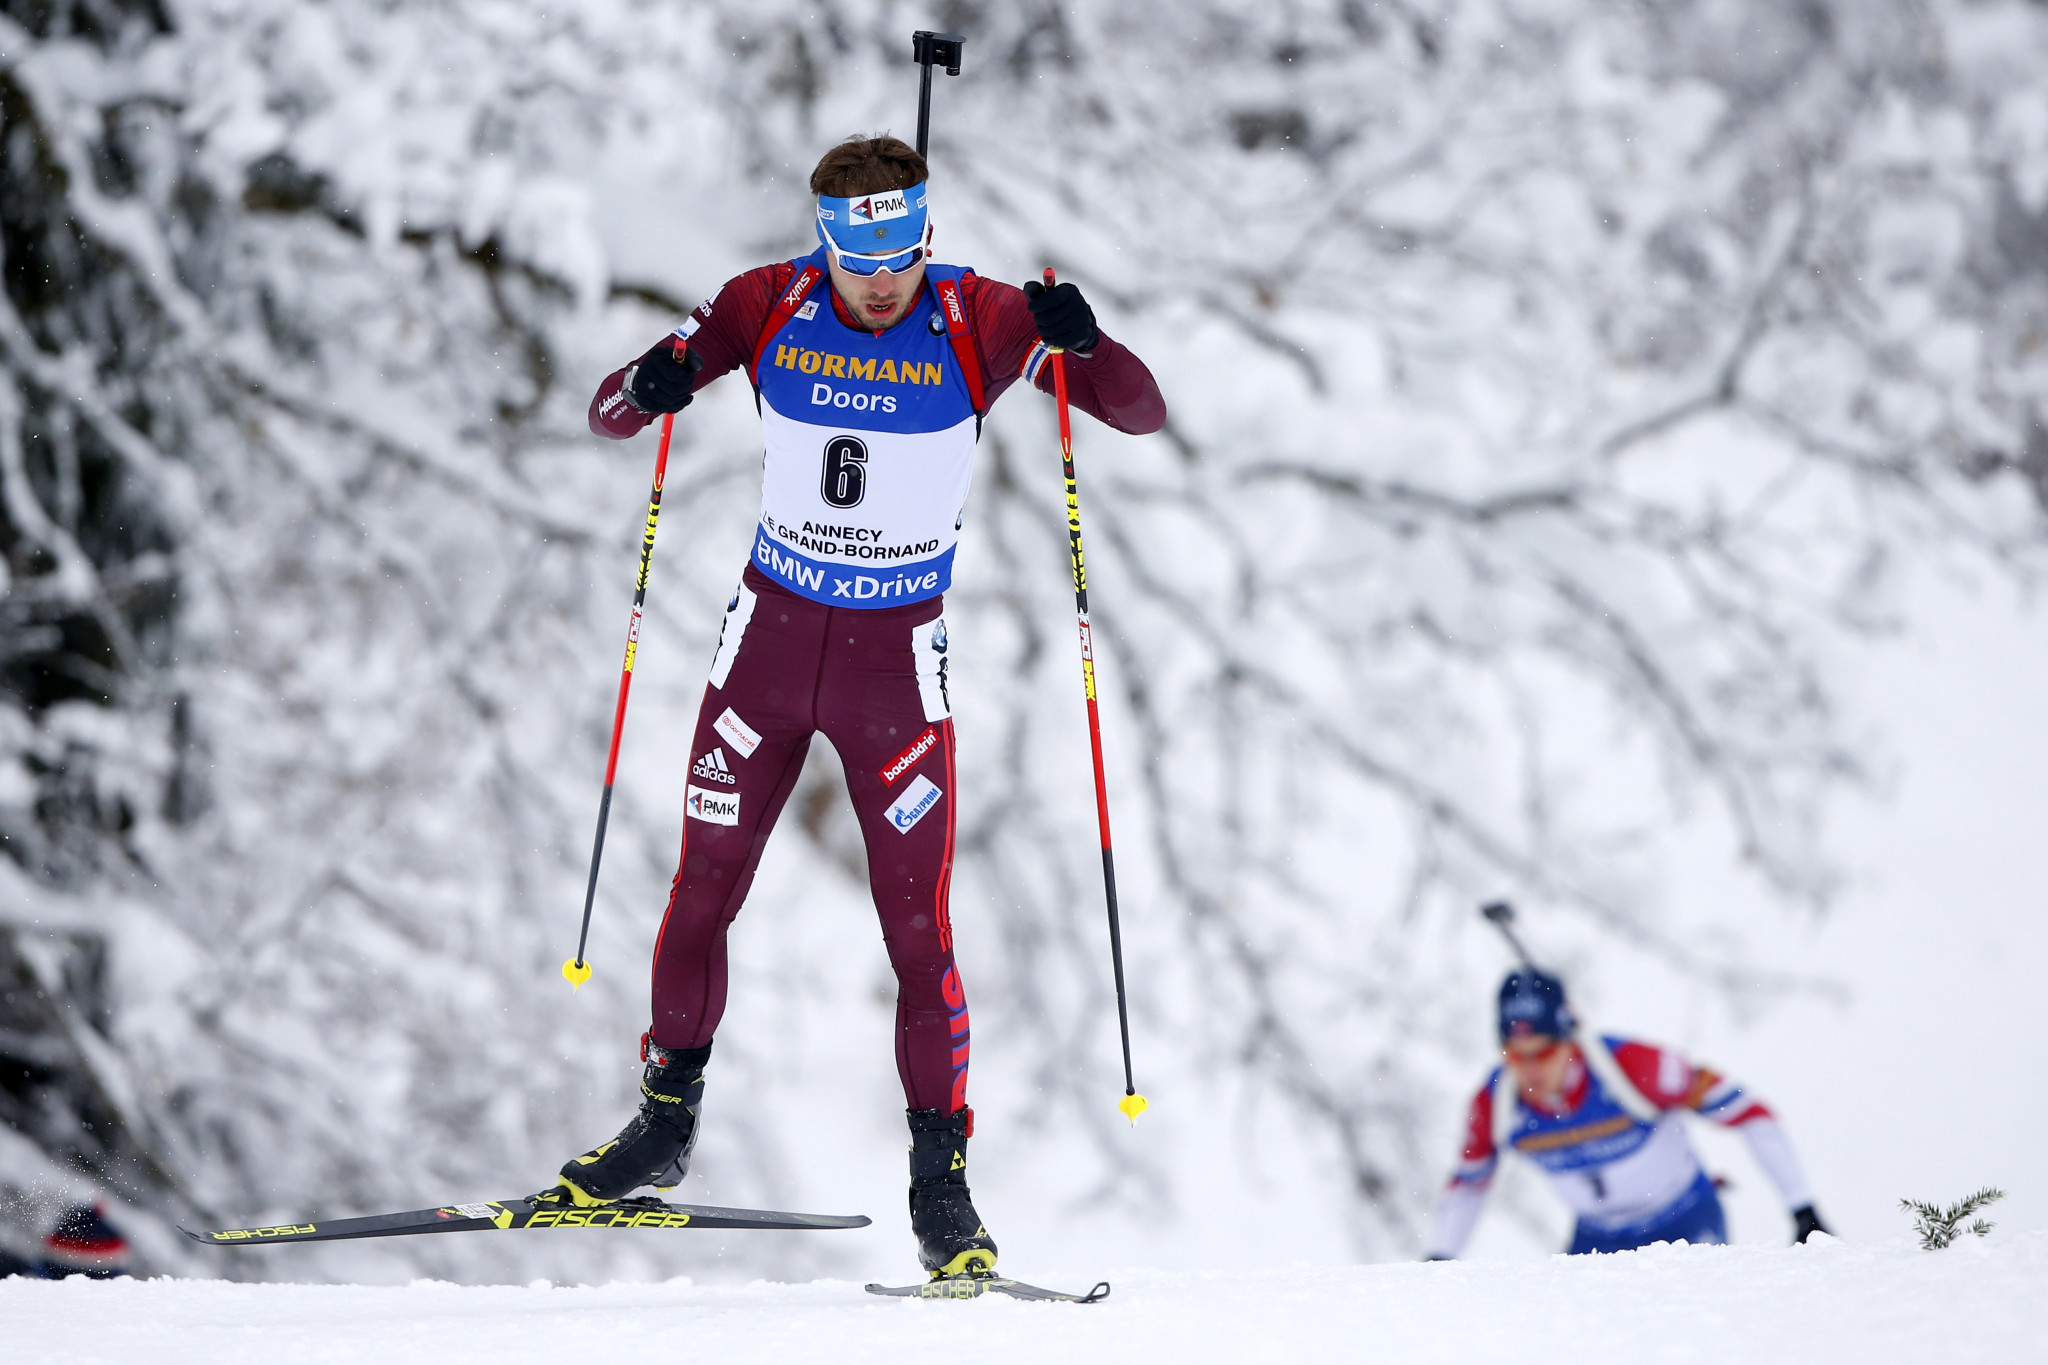 Russia aiming to end podium drought at IBU World Cup in Ruhpolding